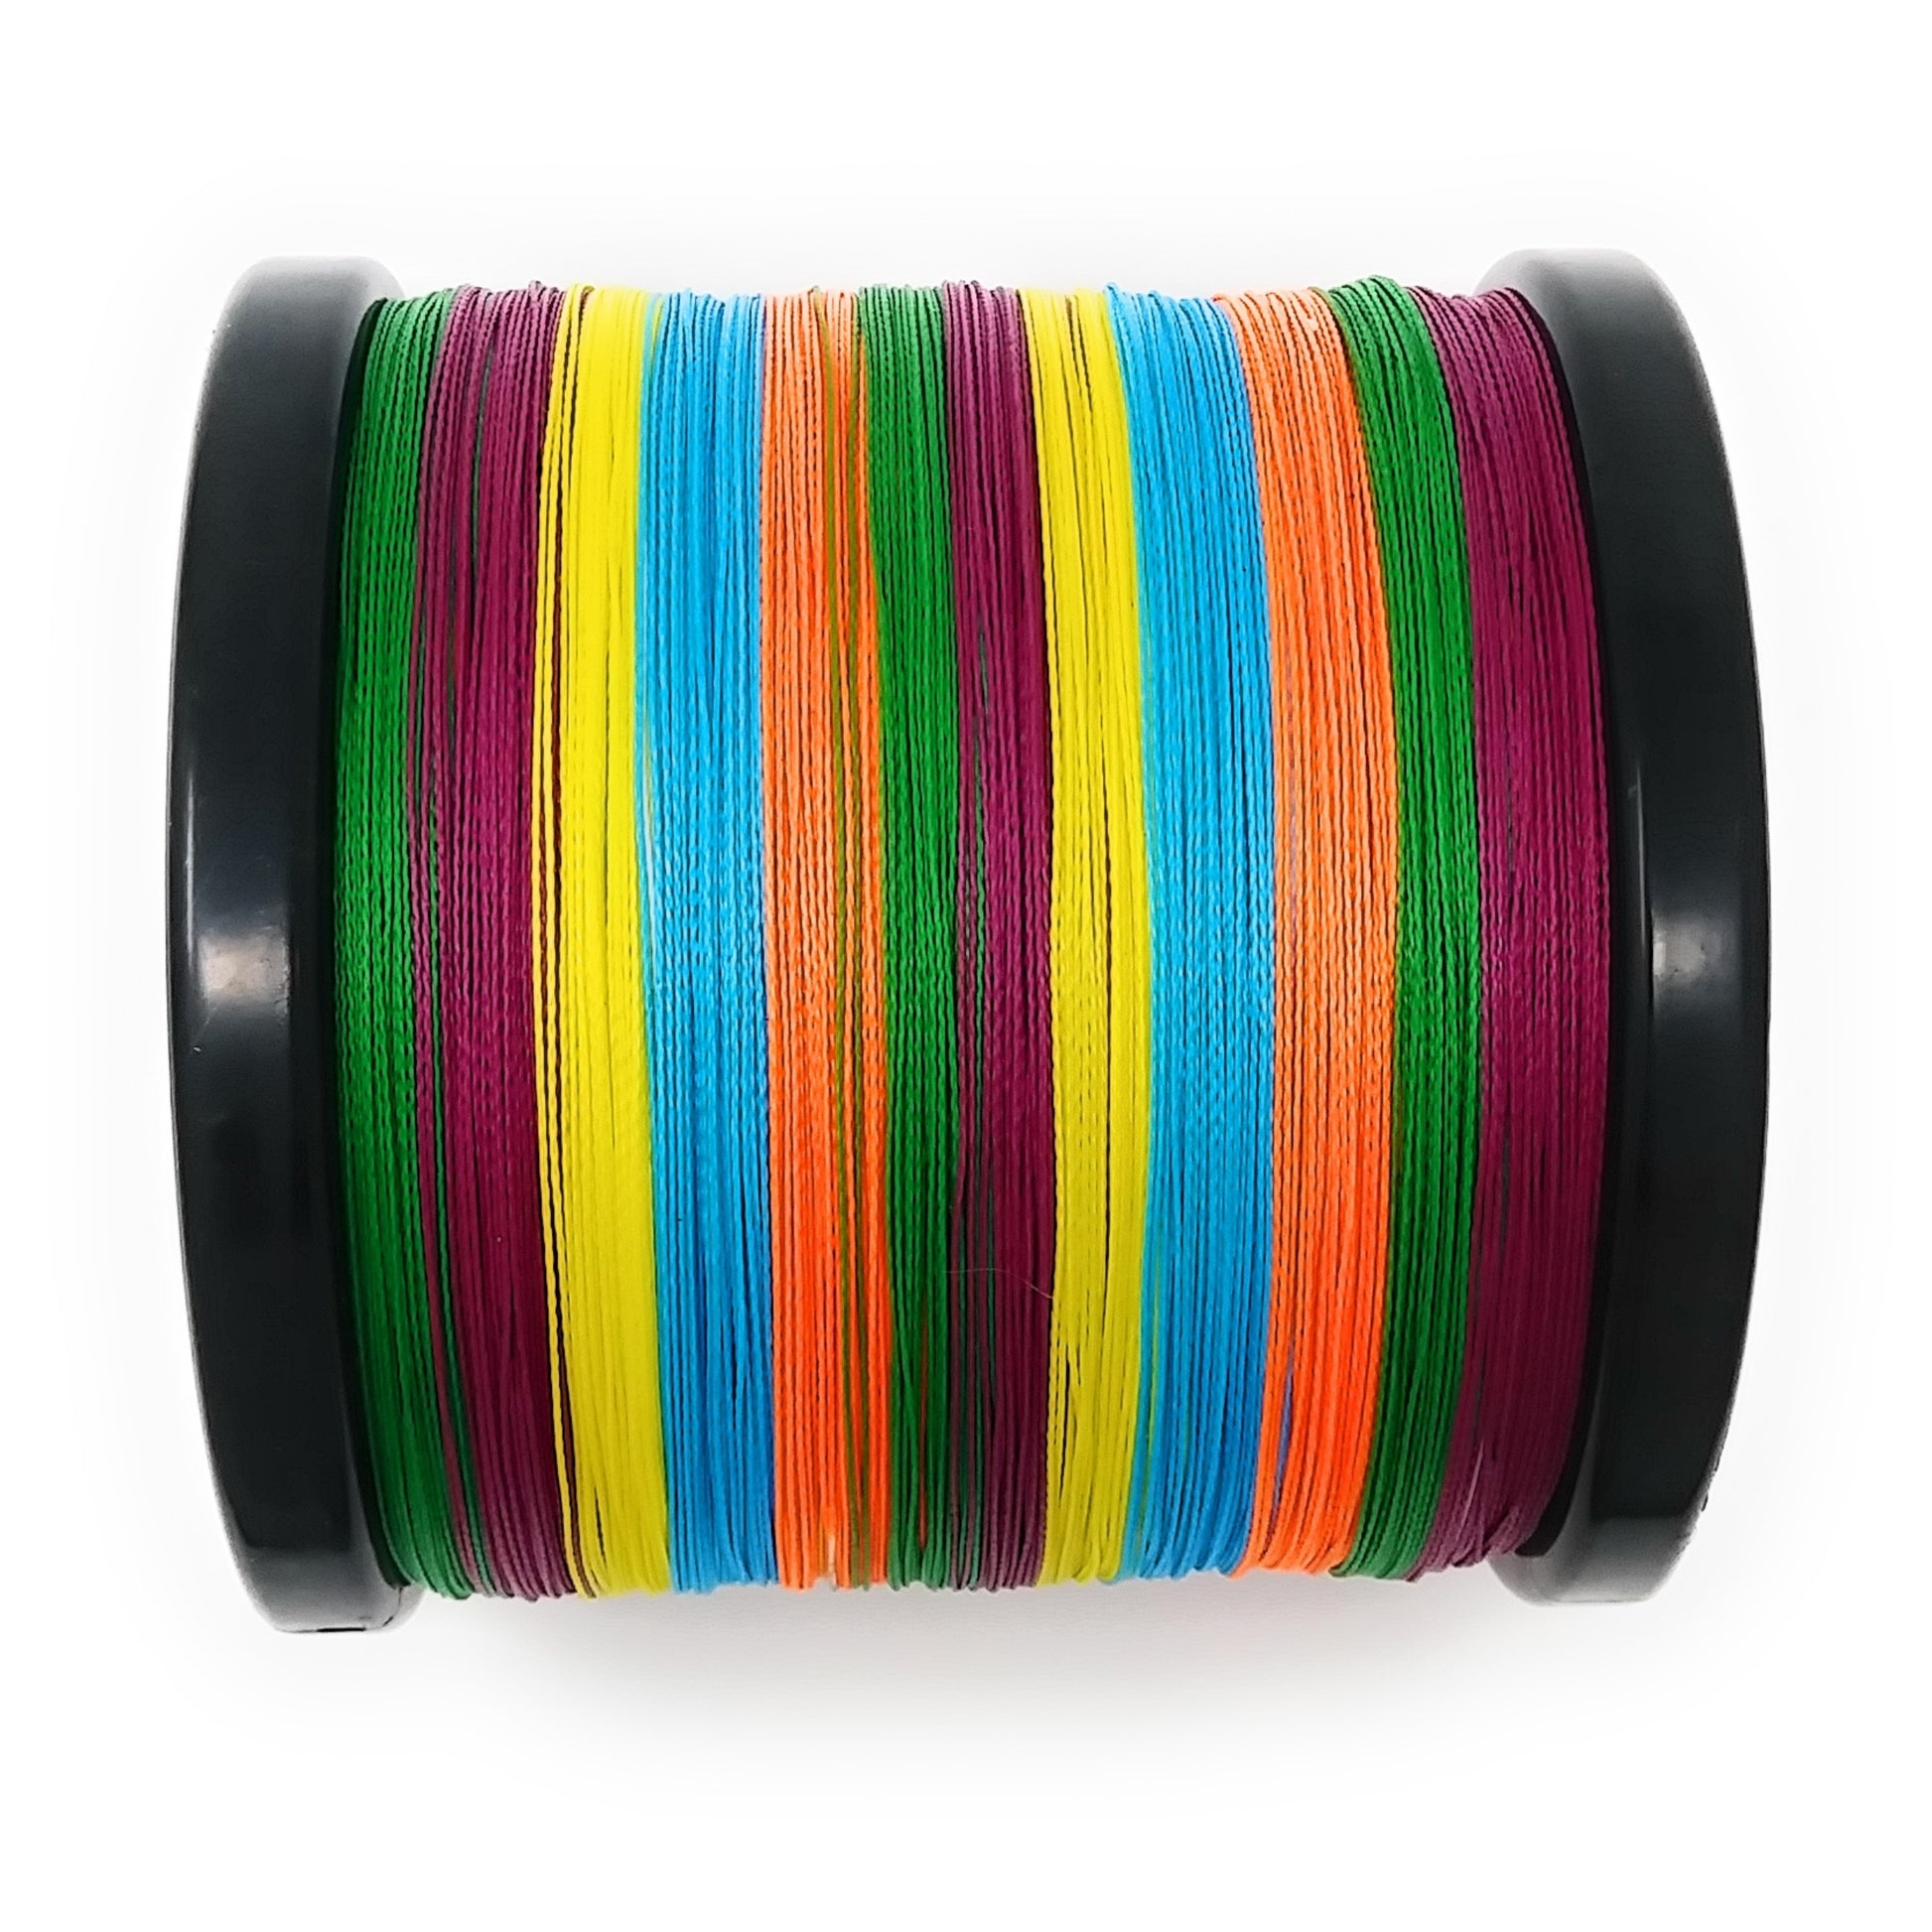 GetUSCart- Reaction Tackle Braided Fishing Line Multi-Color 25LB 300yd